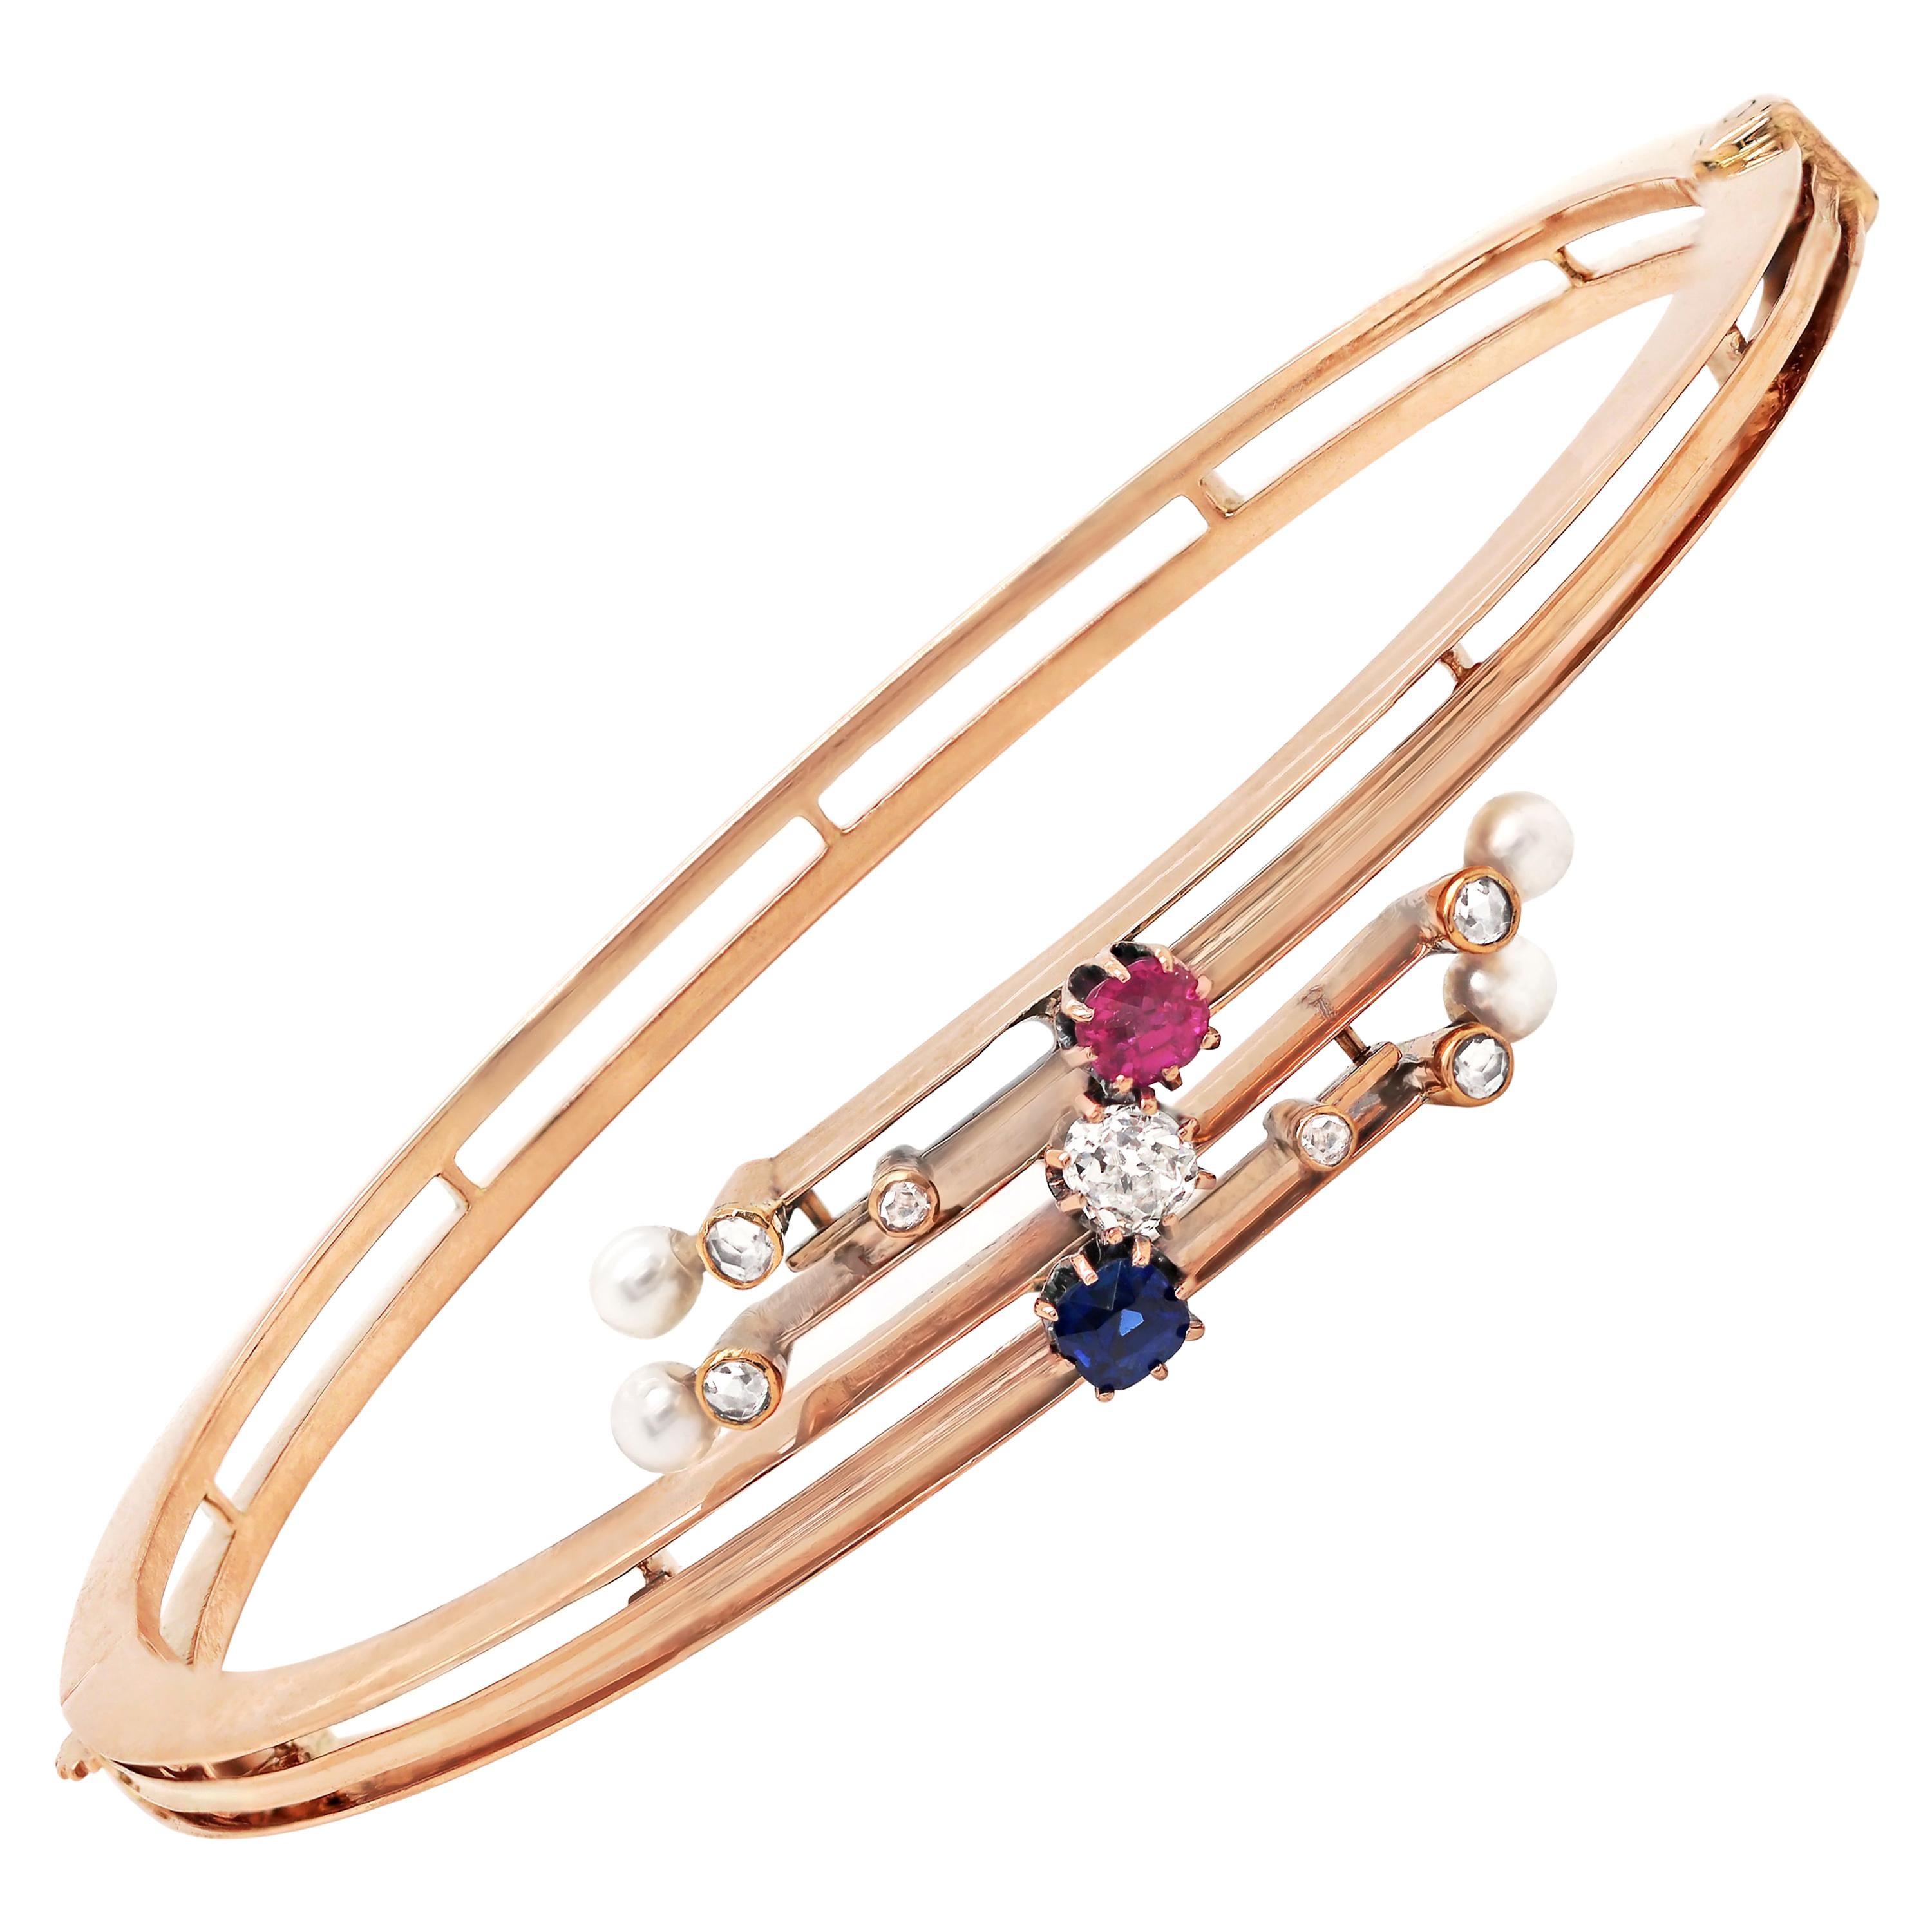 Edwardian 14 Carat Rose Gold Diamond, Sapphire, Ruby and Pearl Bangle, c.1900 For Sale